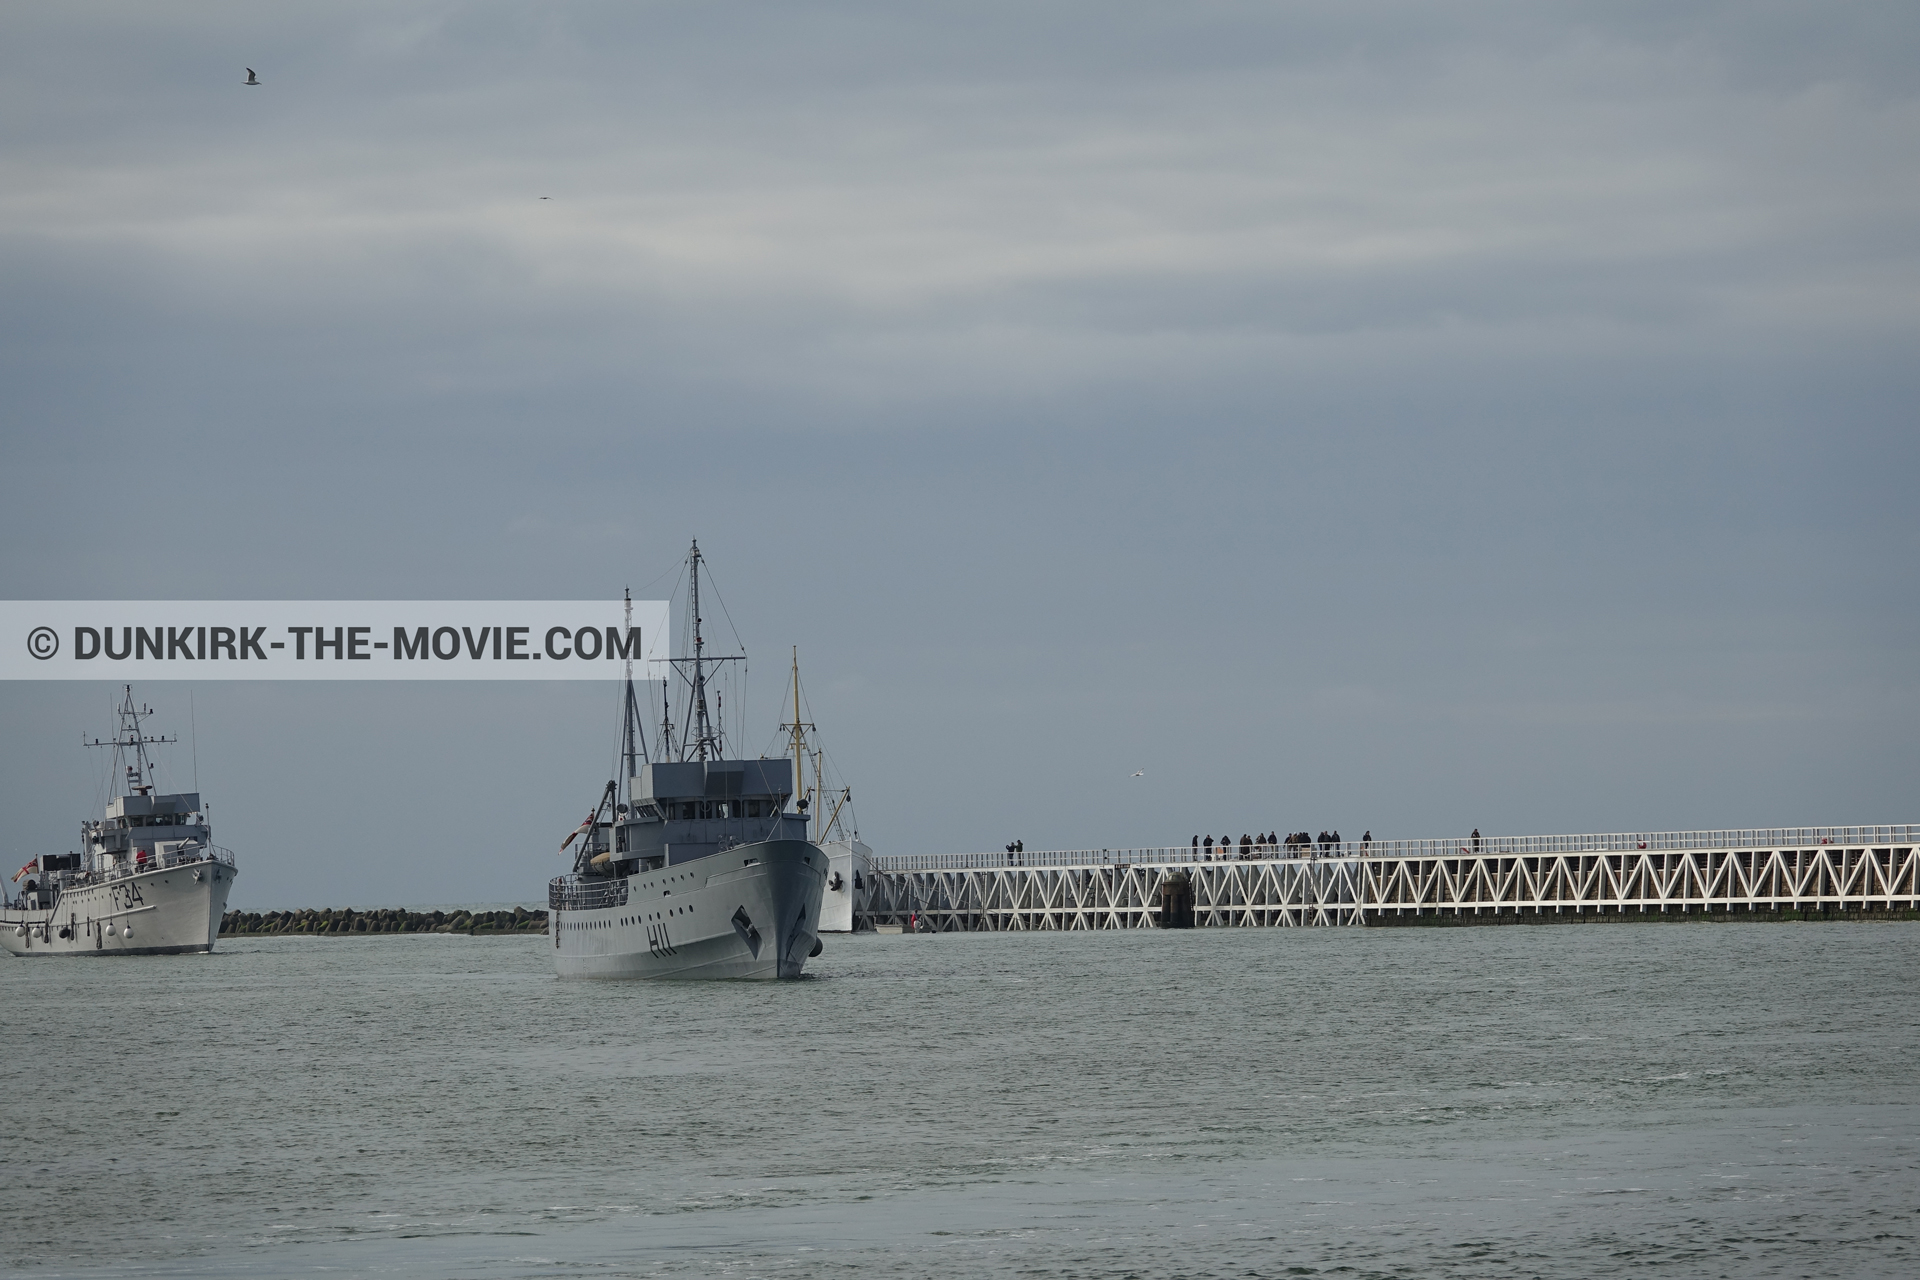 Picture with cloudy sky, F34 - Hr.Ms. Sittard, H11 - MLV Castor, EST pier, calm sea,  from behind the scene of the Dunkirk movie by Nolan